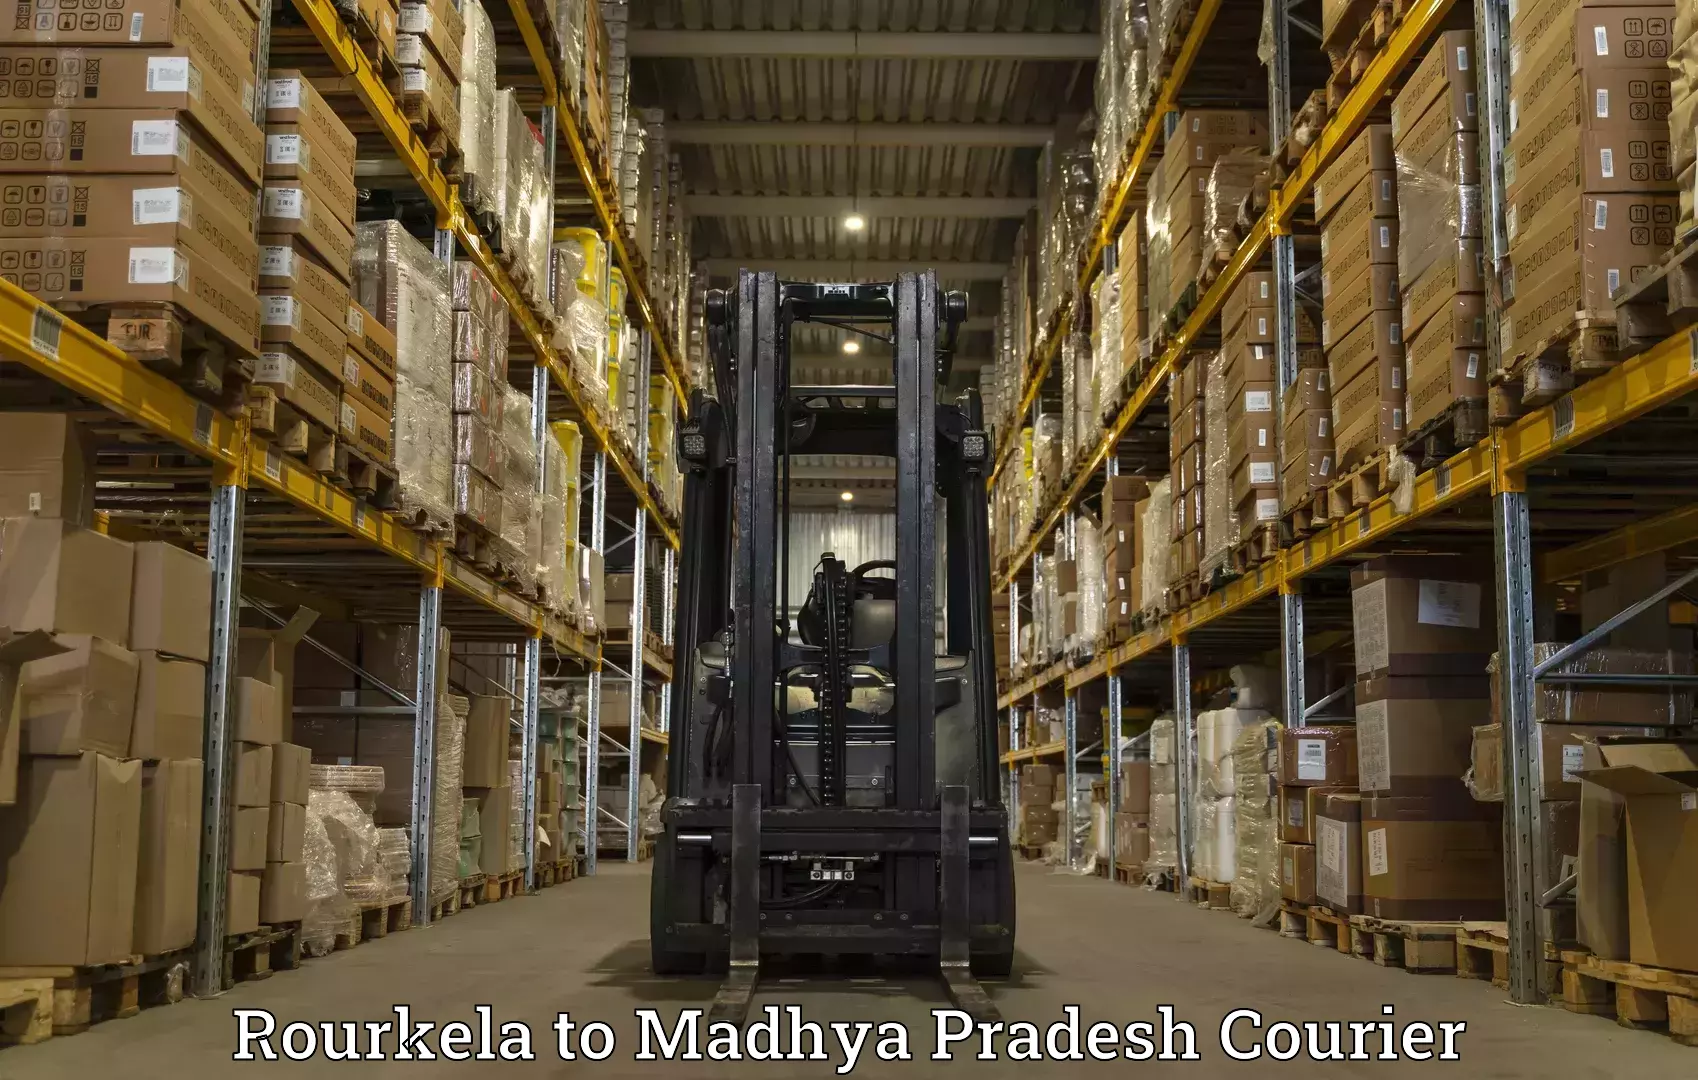 Subscription-based courier Rourkela to Bareli